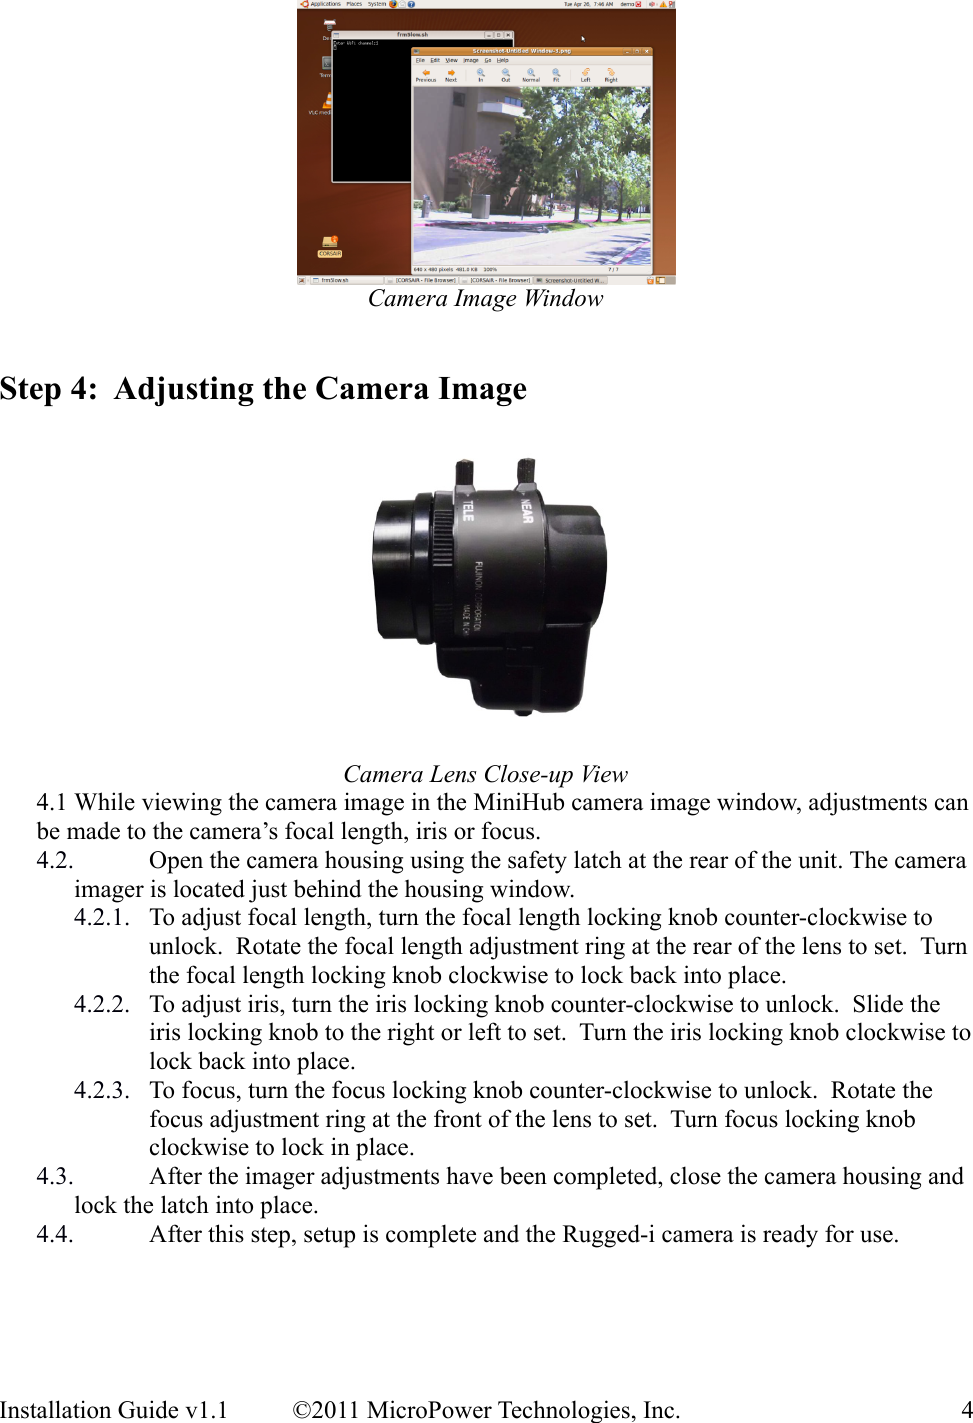 Camera Image WindowStep 4:  Adjusting the Camera ImageCamera Lens Close-up View4.1 While viewing the camera image in the MiniHub camera image window, adjustments can be made to the camera’s focal length, iris or focus.4.2. Open the camera housing using the safety latch at the rear of the unit. The camera imager is located just behind the housing window.4.2.1. To adjust focal length, turn the focal length locking knob counter-clockwise to unlock.  Rotate the focal length adjustment ring at the rear of the lens to set.  Turn the focal length locking knob clockwise to lock back into place.4.2.2. To adjust iris, turn the iris locking knob counter-clockwise to unlock.  Slide the iris locking knob to the right or left to set.  Turn the iris locking knob clockwise to lock back into place.4.2.3. To focus, turn the focus locking knob counter-clockwise to unlock.  Rotate the focus adjustment ring at the front of the lens to set.  Turn focus locking knob clockwise to lock in place.4.3. After the imager adjustments have been completed, close the camera housing and lock the latch into place.4.4. After this step, setup is complete and the Rugged-i camera is ready for use.Installation Guide v1.1 ©2011 MicroPower Technologies, Inc. 4